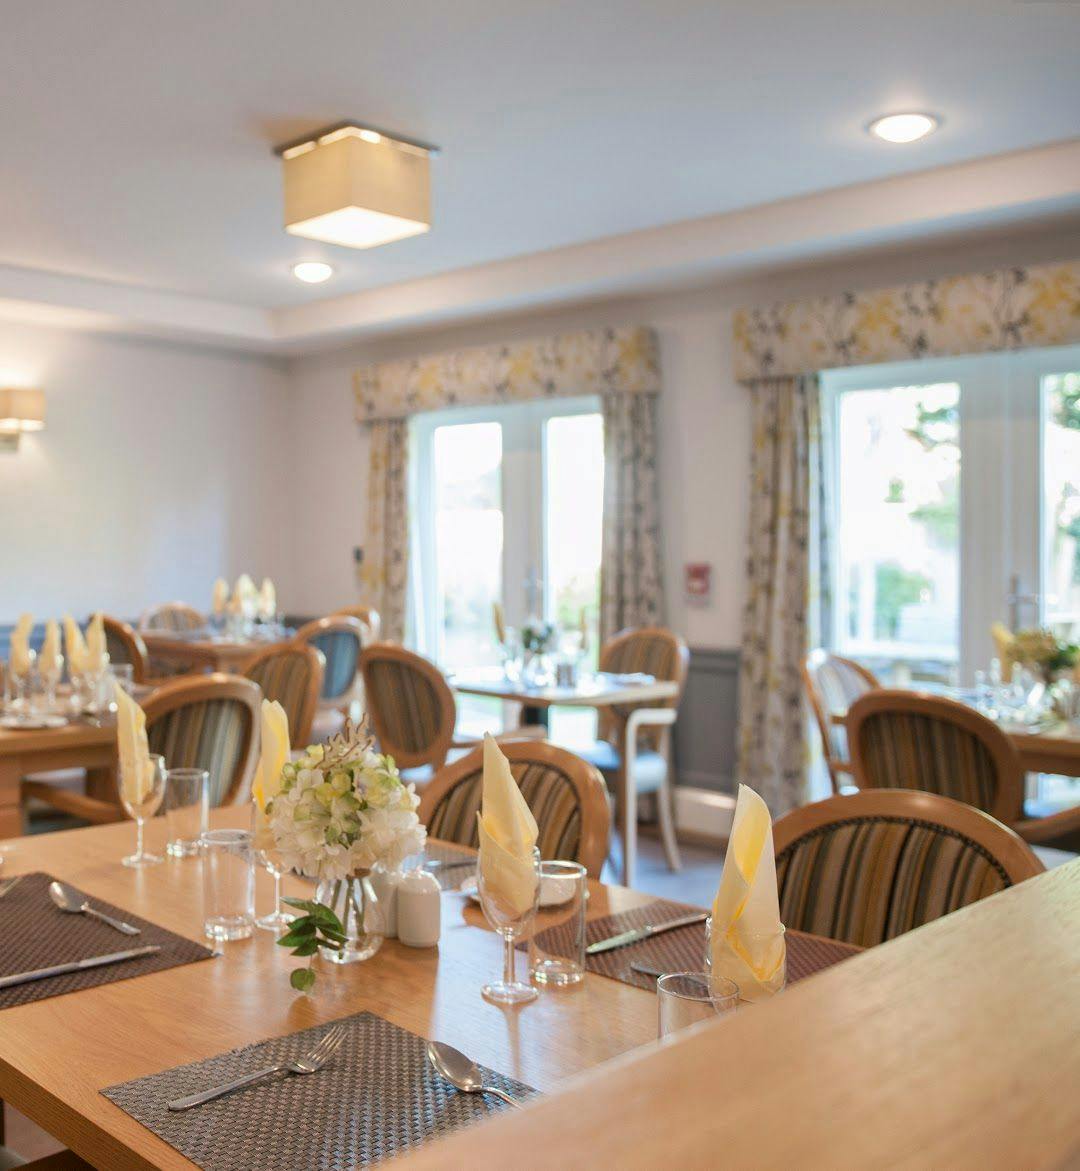 The dining area at Fountains Lodge Care Home in Tunbridge Wells, Kent